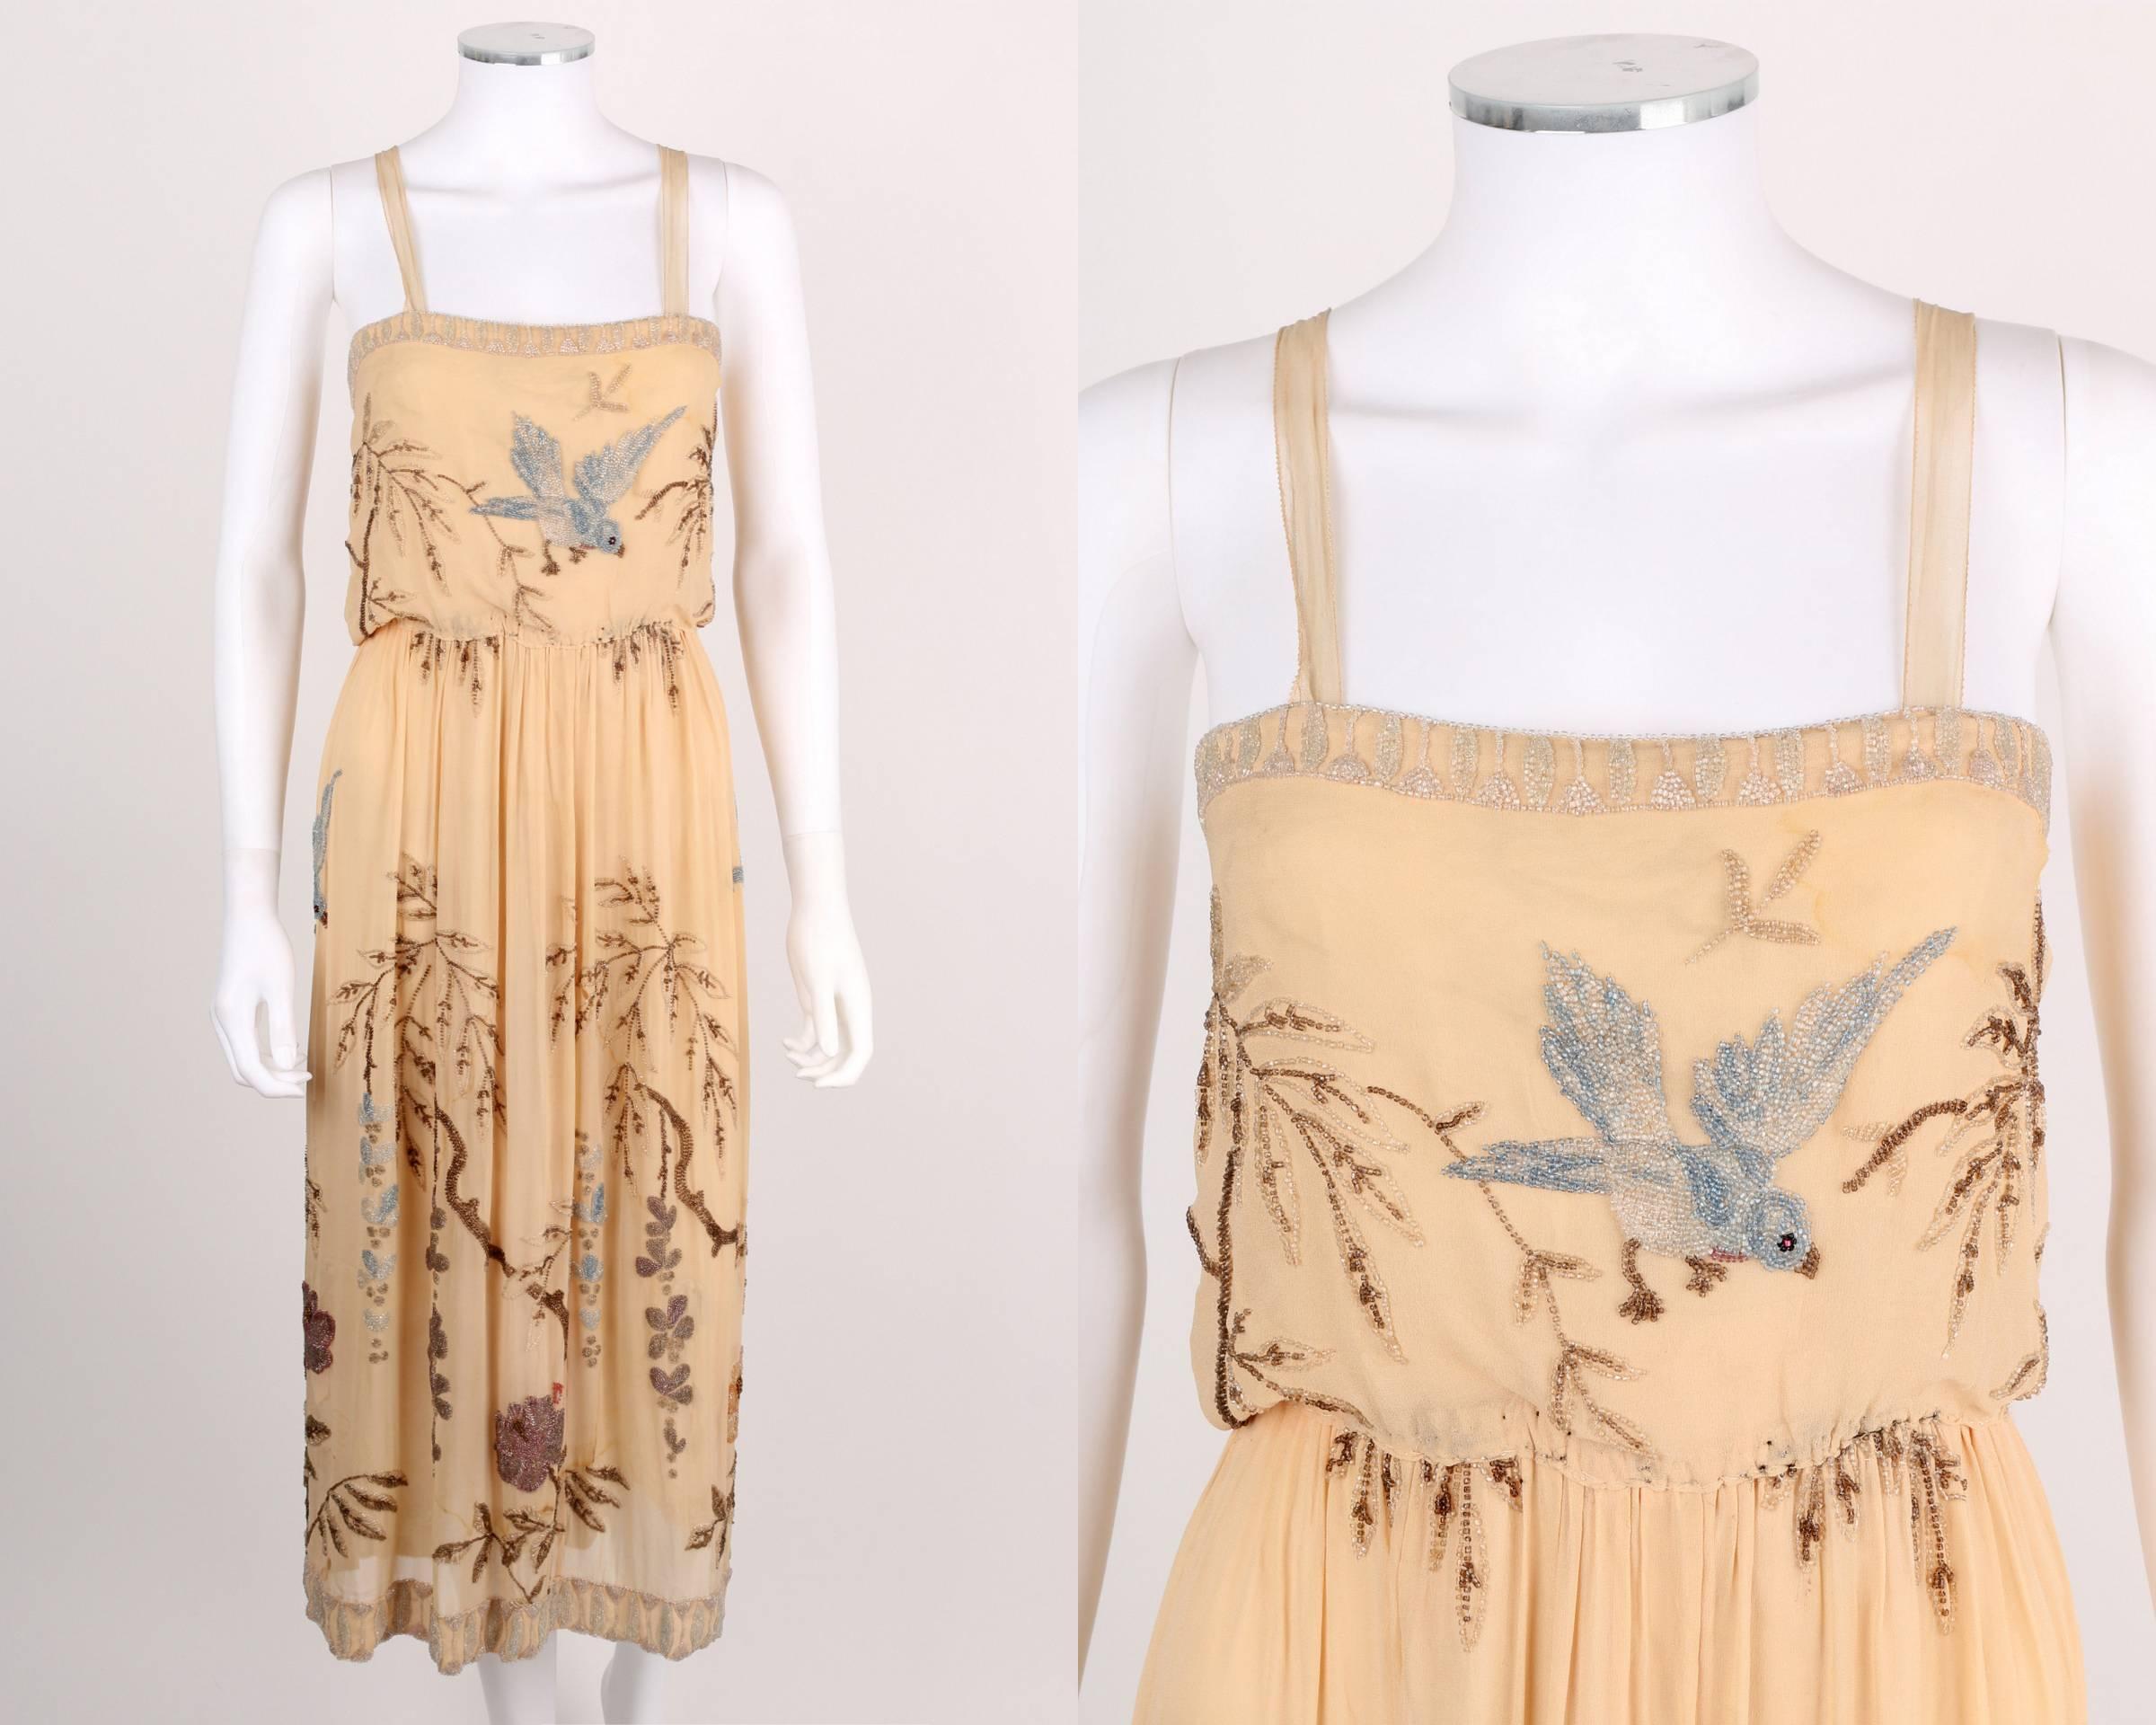 Sadie Nemser c.1920's Cream Floral Bird Bead Embellished Silk Evening Dress 

Brand / Manufacturer: Sadie Nemser
Designer: Sadie Nemser
Circa: 1920's
Style: Evening Dress
Color(s): Shades of cream, pink, brown, and blue
Lined: Yes
Unmarked Fabric